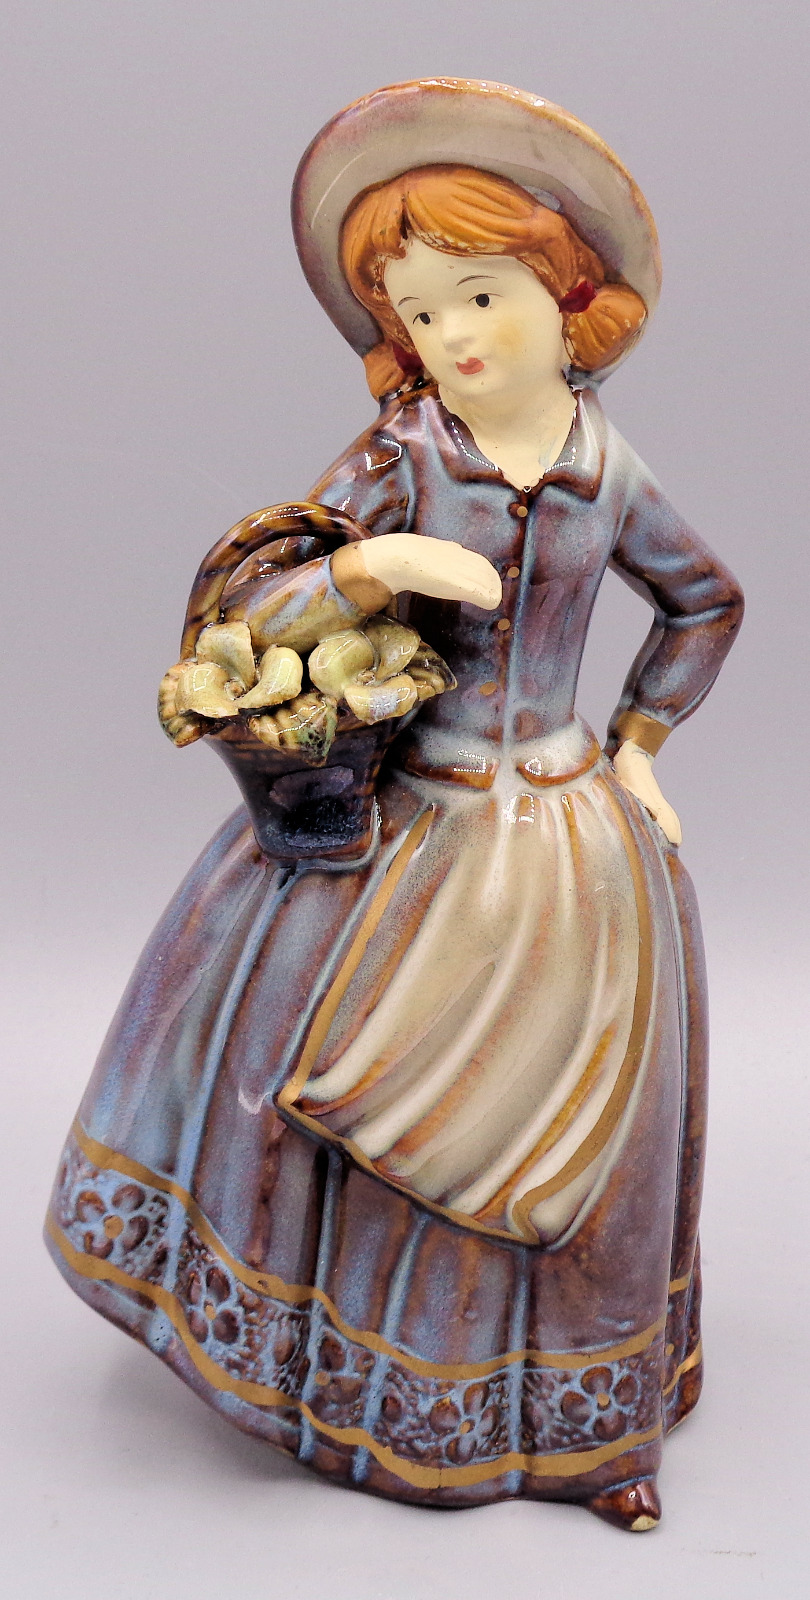 Vintage Pottery Hand Painted Glazed Figurine Girl With Basket of Flowers